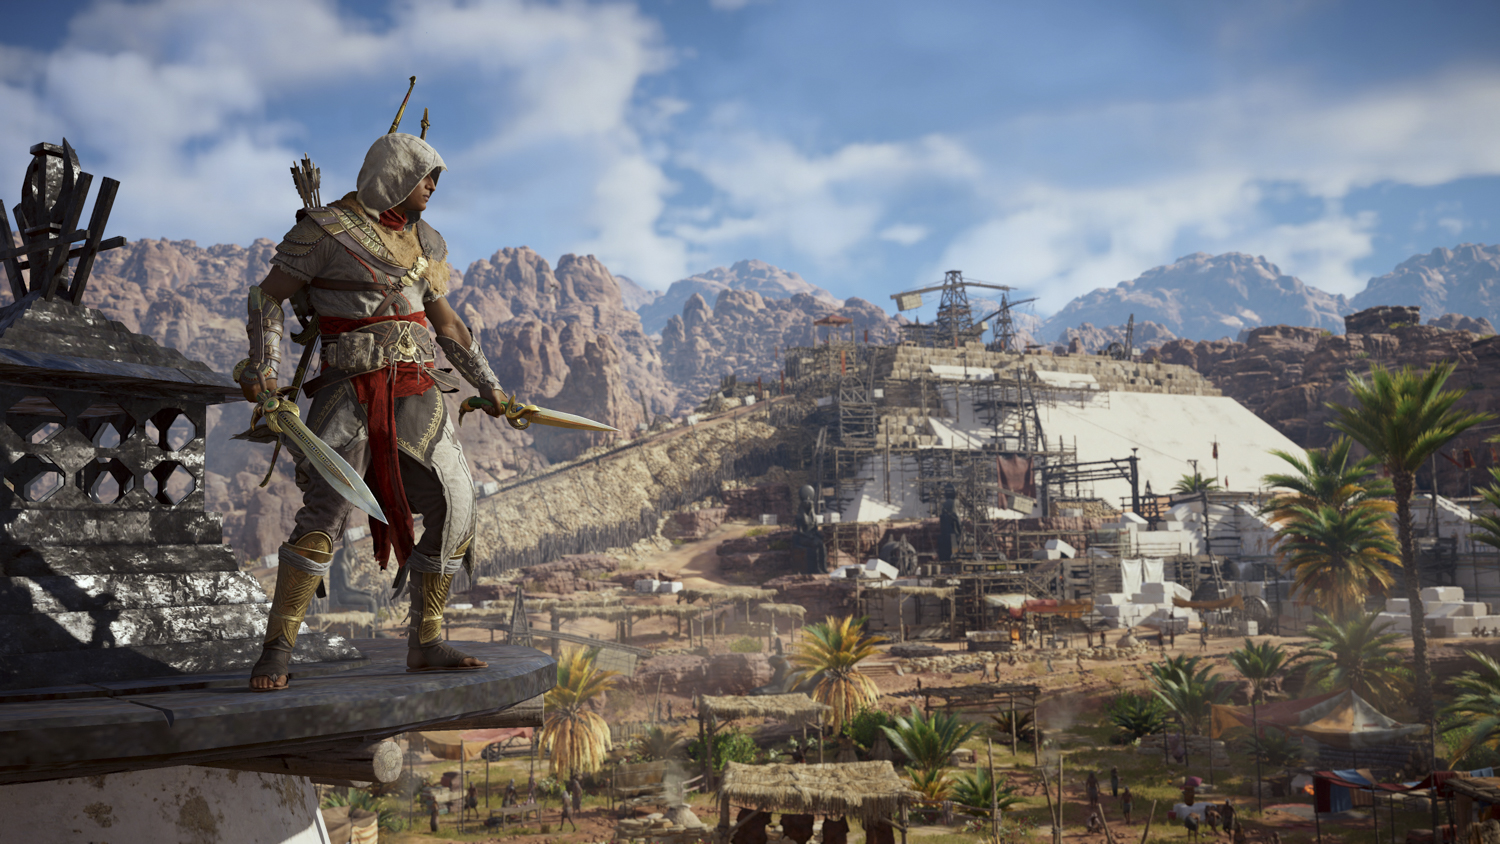 Assassin's Creed: Origins will get a new game+ mode